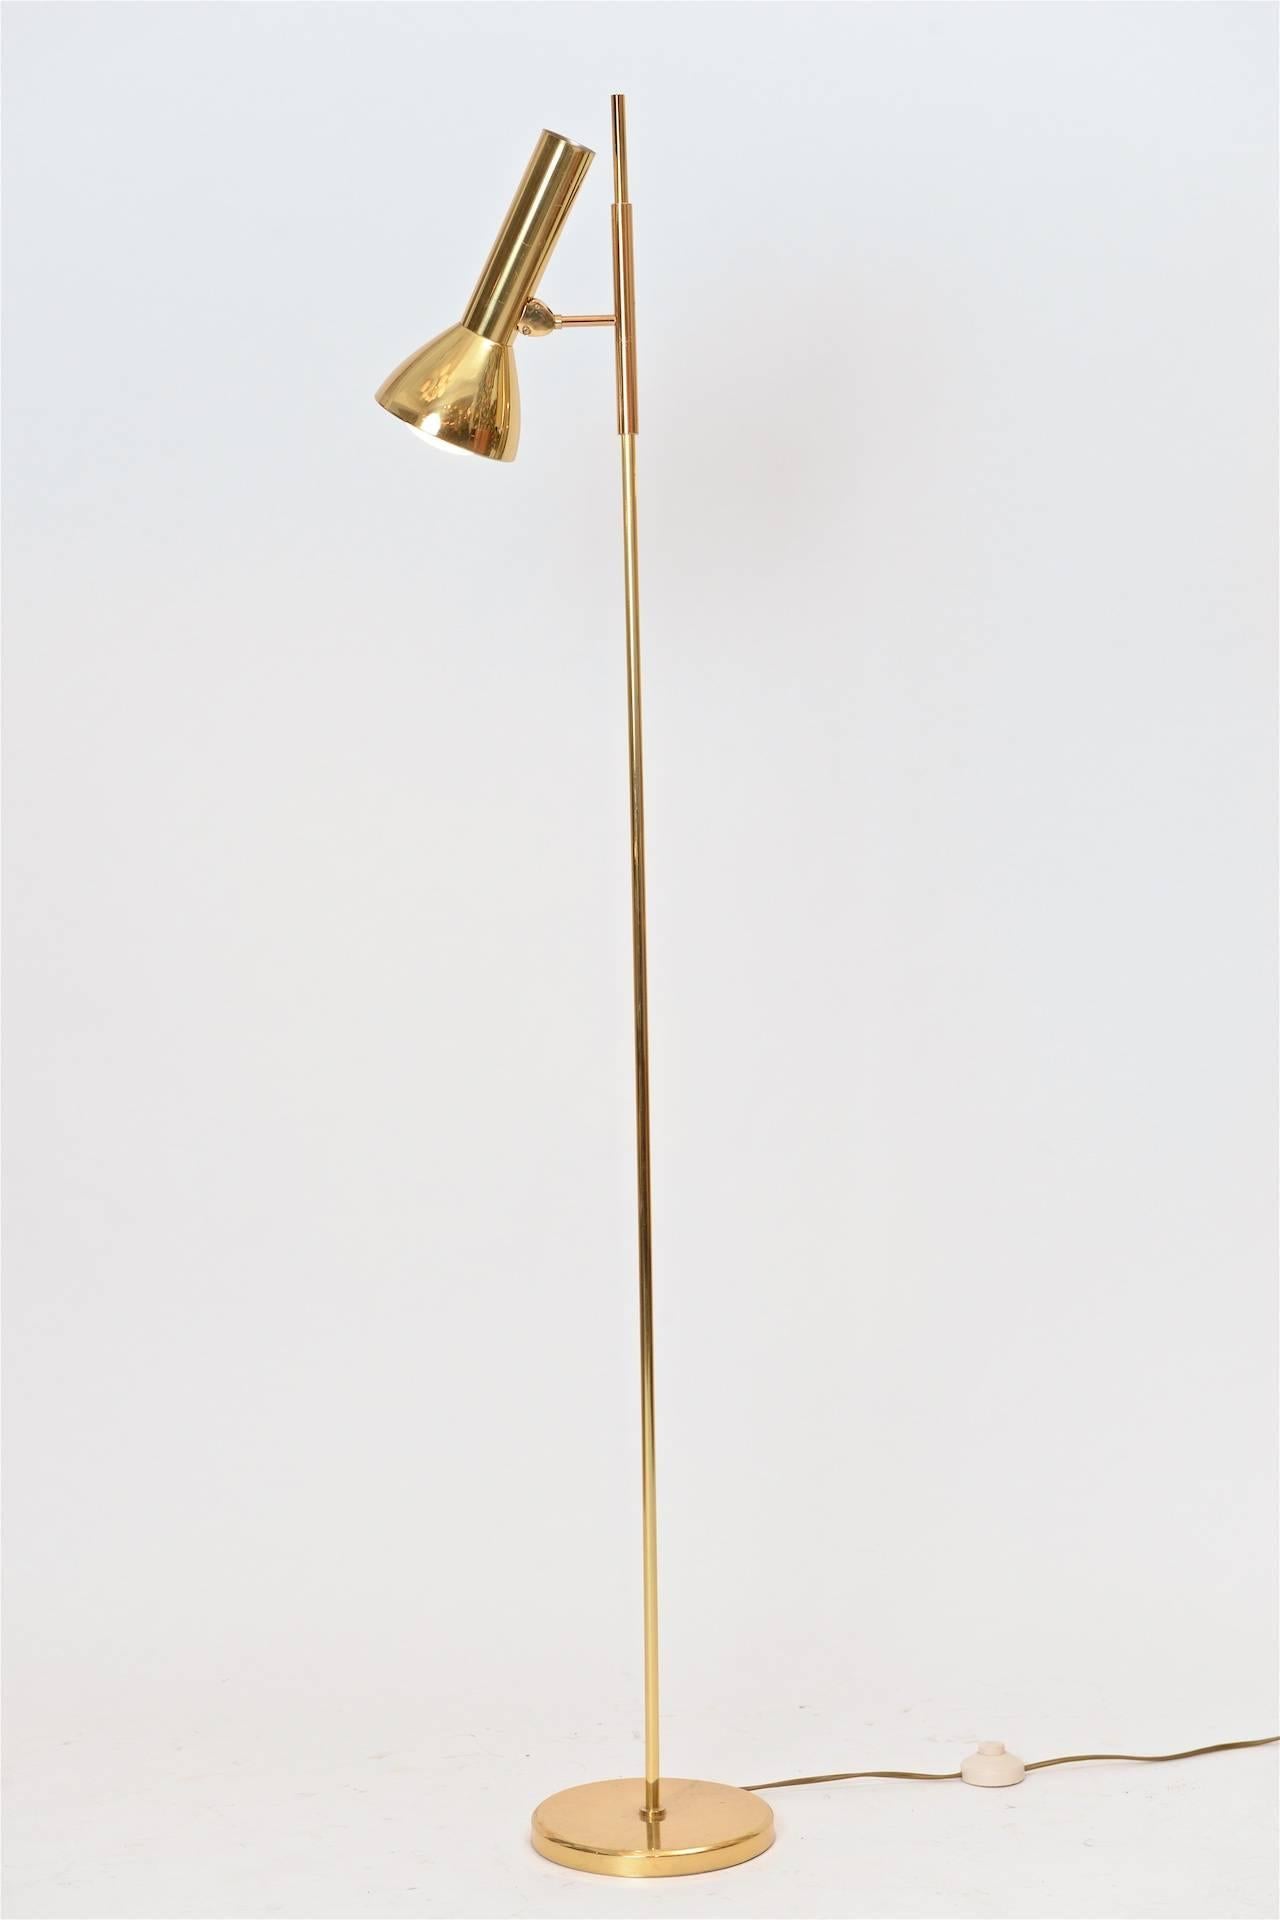 Minimal brass good quality floor lamp. Shade can be angled 360 degree.

Probably German, circa 1980.